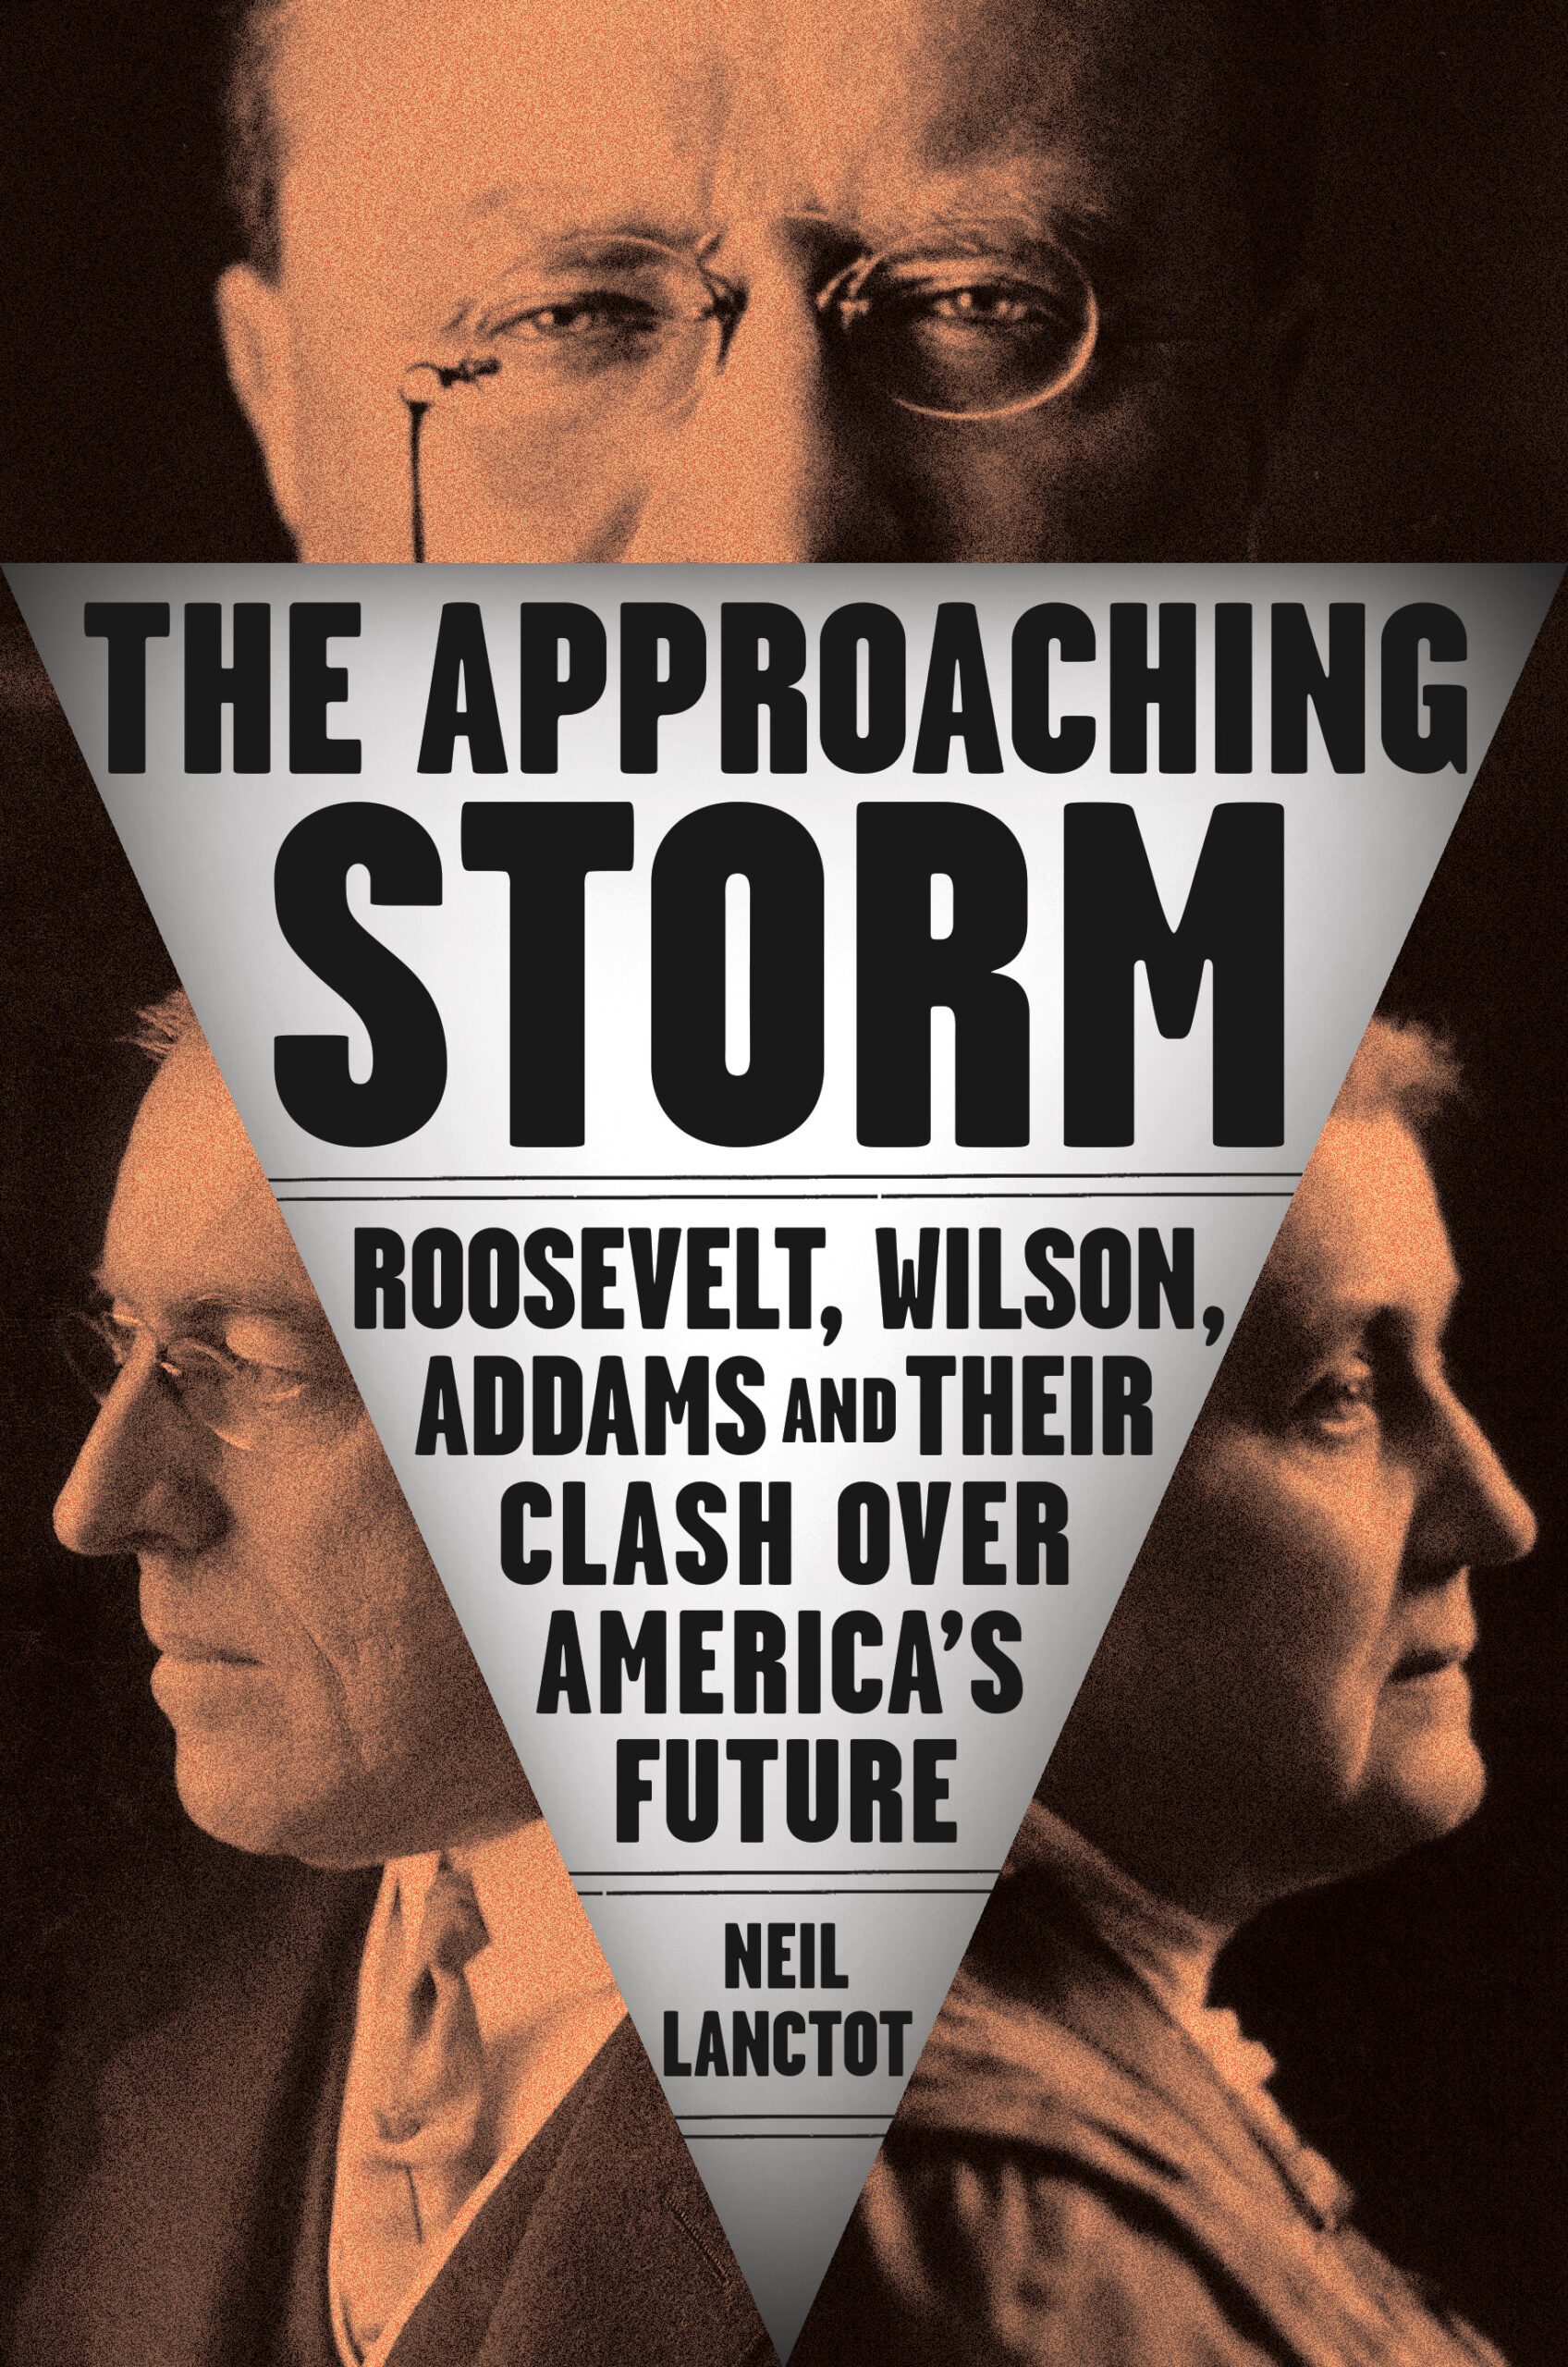 Neil Lanctot, "The Approaching storm: Roosevelt, Wilson, Addams and their Clash over America's Future"